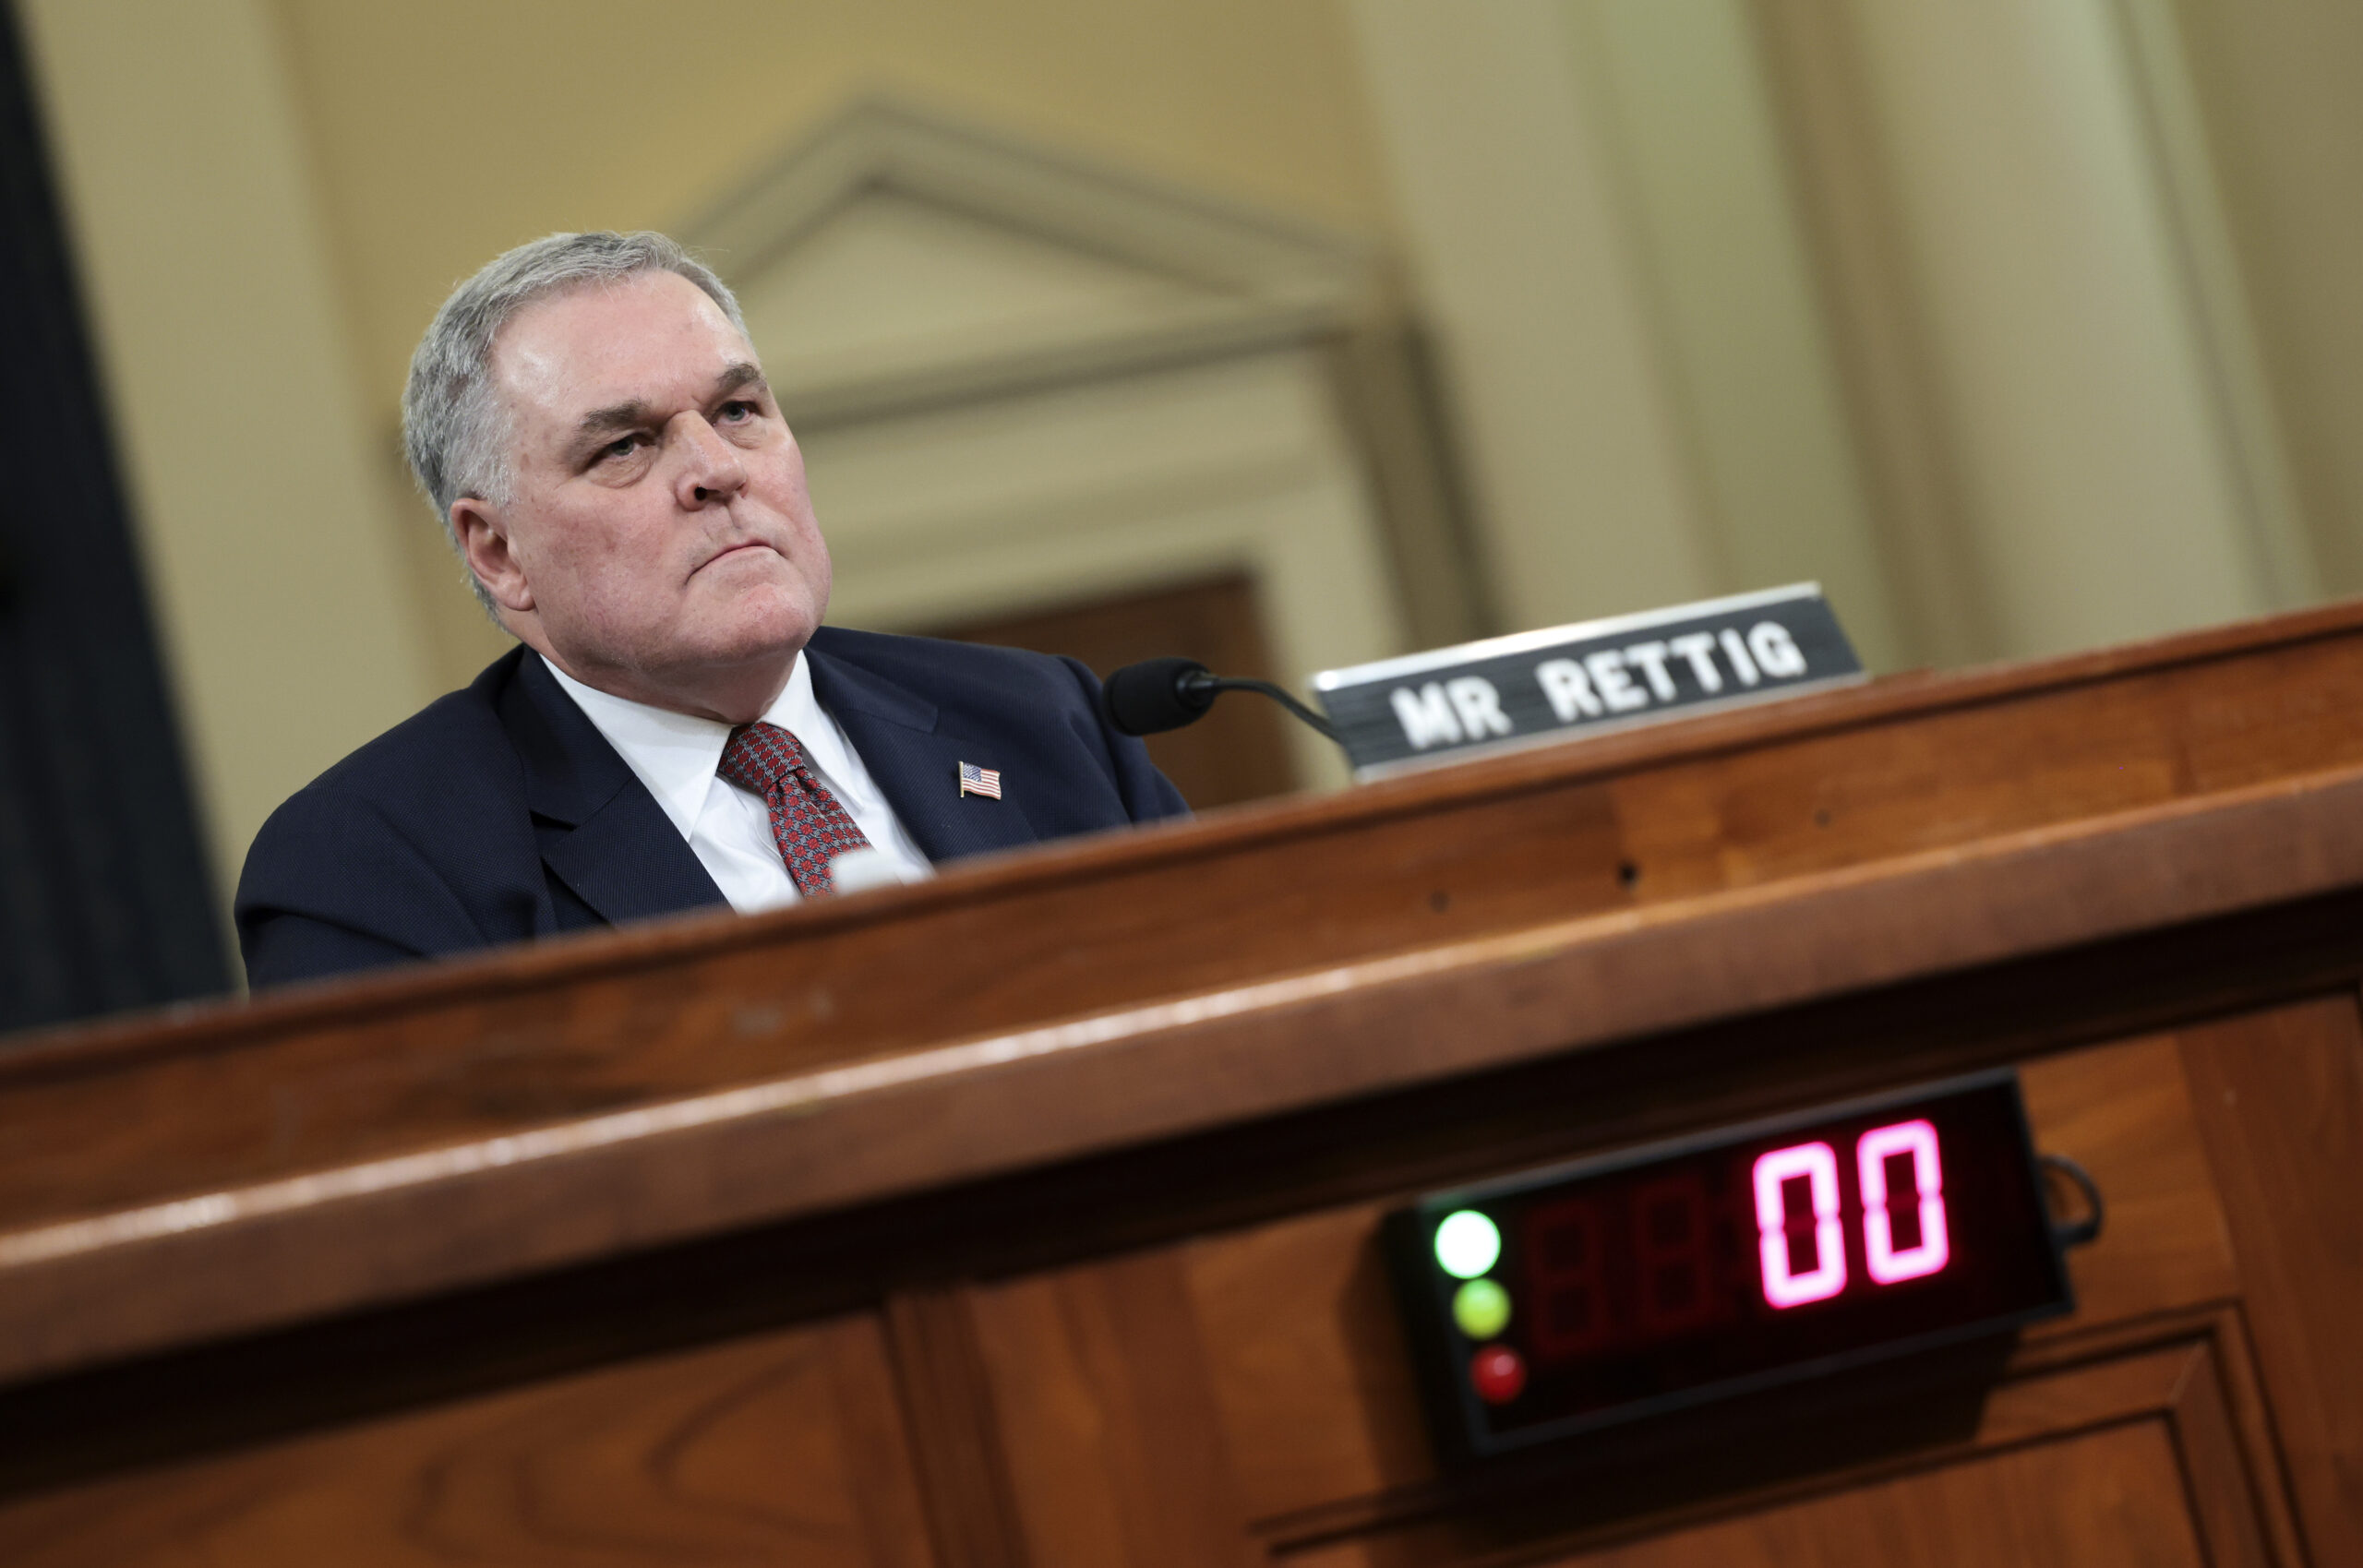 Image of IRS Commissioner Charles Rettig testifying in front of Congress